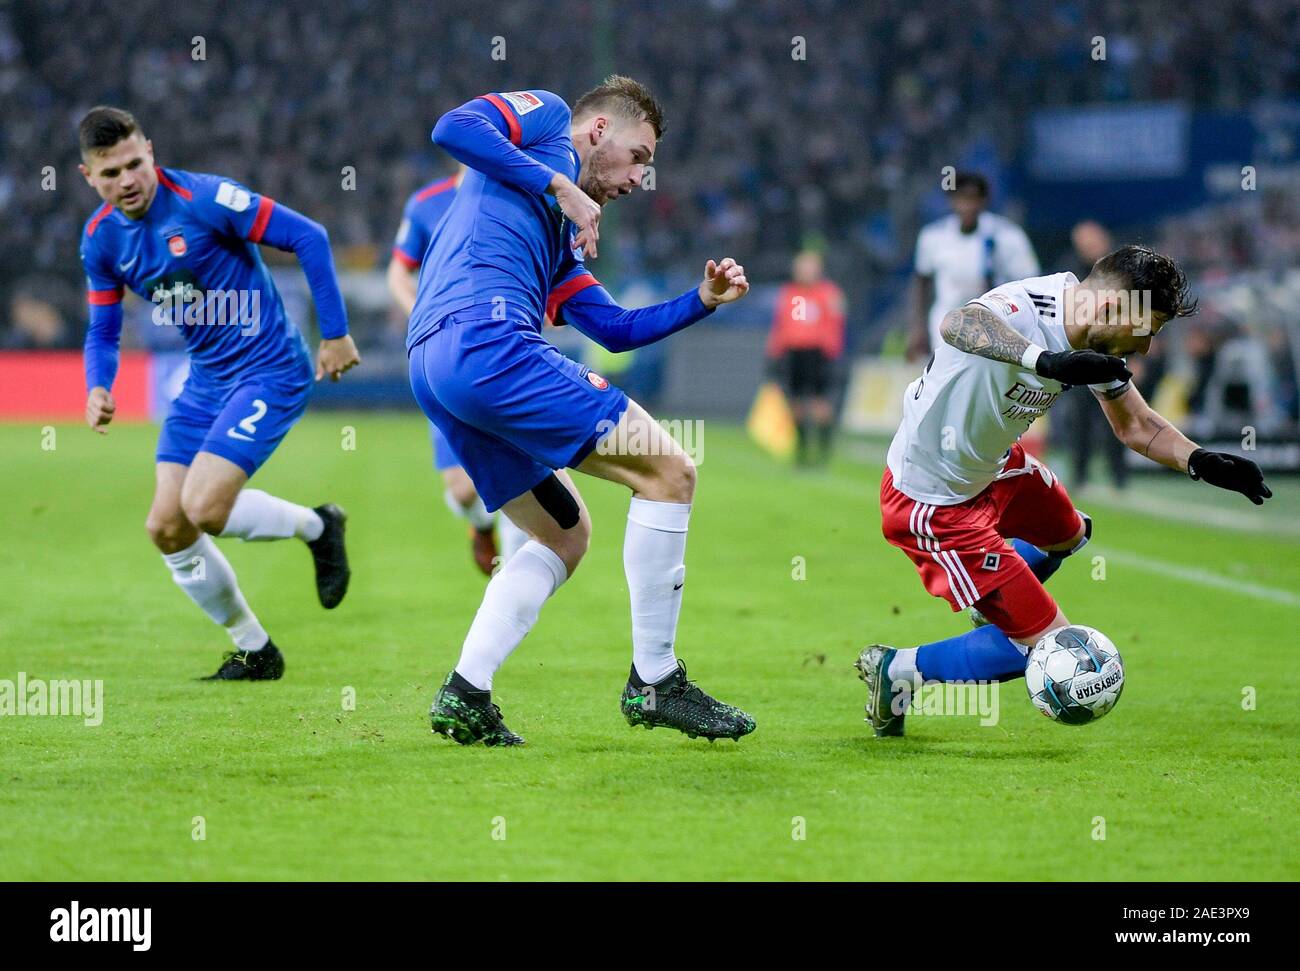 Hamburg, Germany. 06th Dec, 2019. Soccer: 2nd Bundesliga, Hamburger SV - 1st FC Heidenheim, 16th matchday. Heidenheim's Marnon Busch (l-r), Heidenheim's Patrick Mainka and Hamburg's Tim Leibold fight for the ball. Credit: Axel Heimken/dpa - IMPORTANT NOTE: In accordance with the requirements of the DFL Deutsche Fußball Liga or the DFB Deutscher Fußball-Bund, it is prohibited to use or have used photographs taken in the stadium and/or the match in the form of sequence images and/or video-like photo sequences./dpa/Alamy Live News Stock Photo